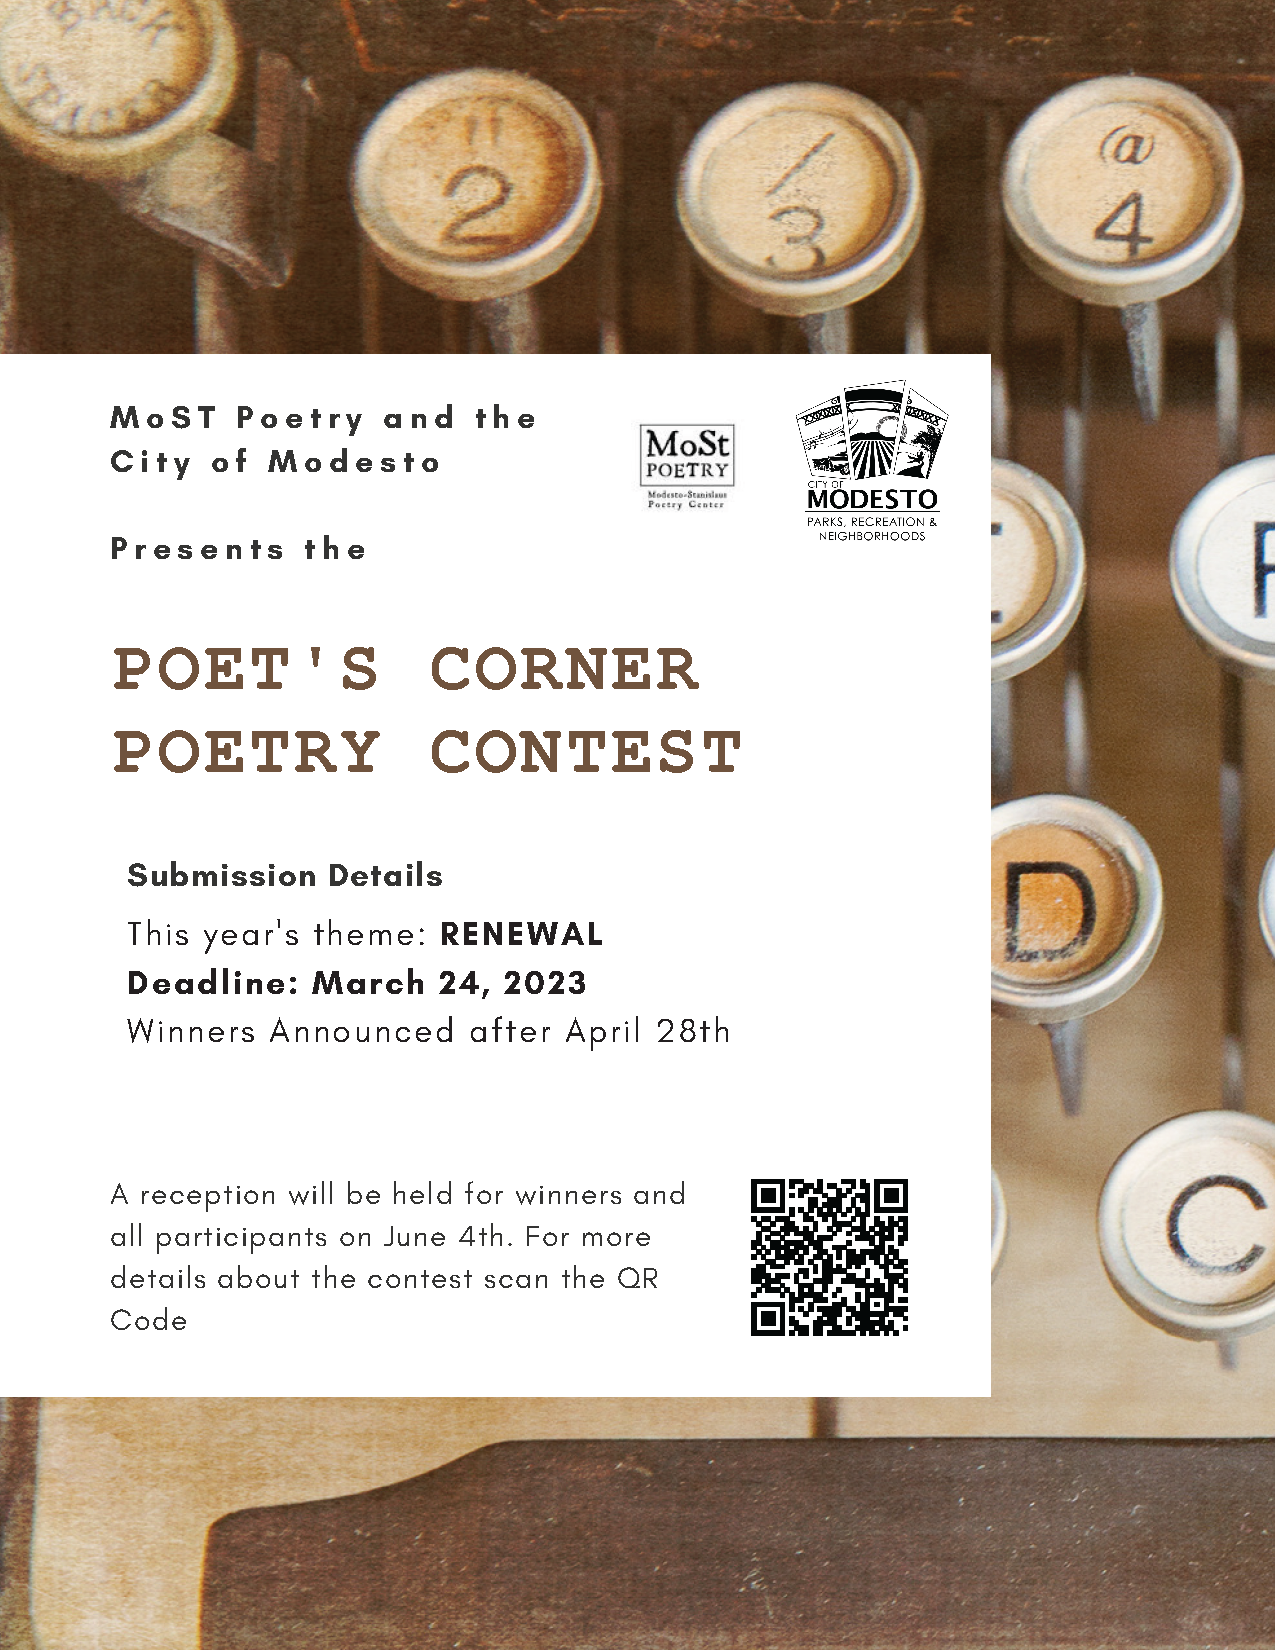 City of Modesto and the Poet's Corner Committee present the annual Poet's Corner Contest. Deadline is Friday, March 24 at 11:59 pm.